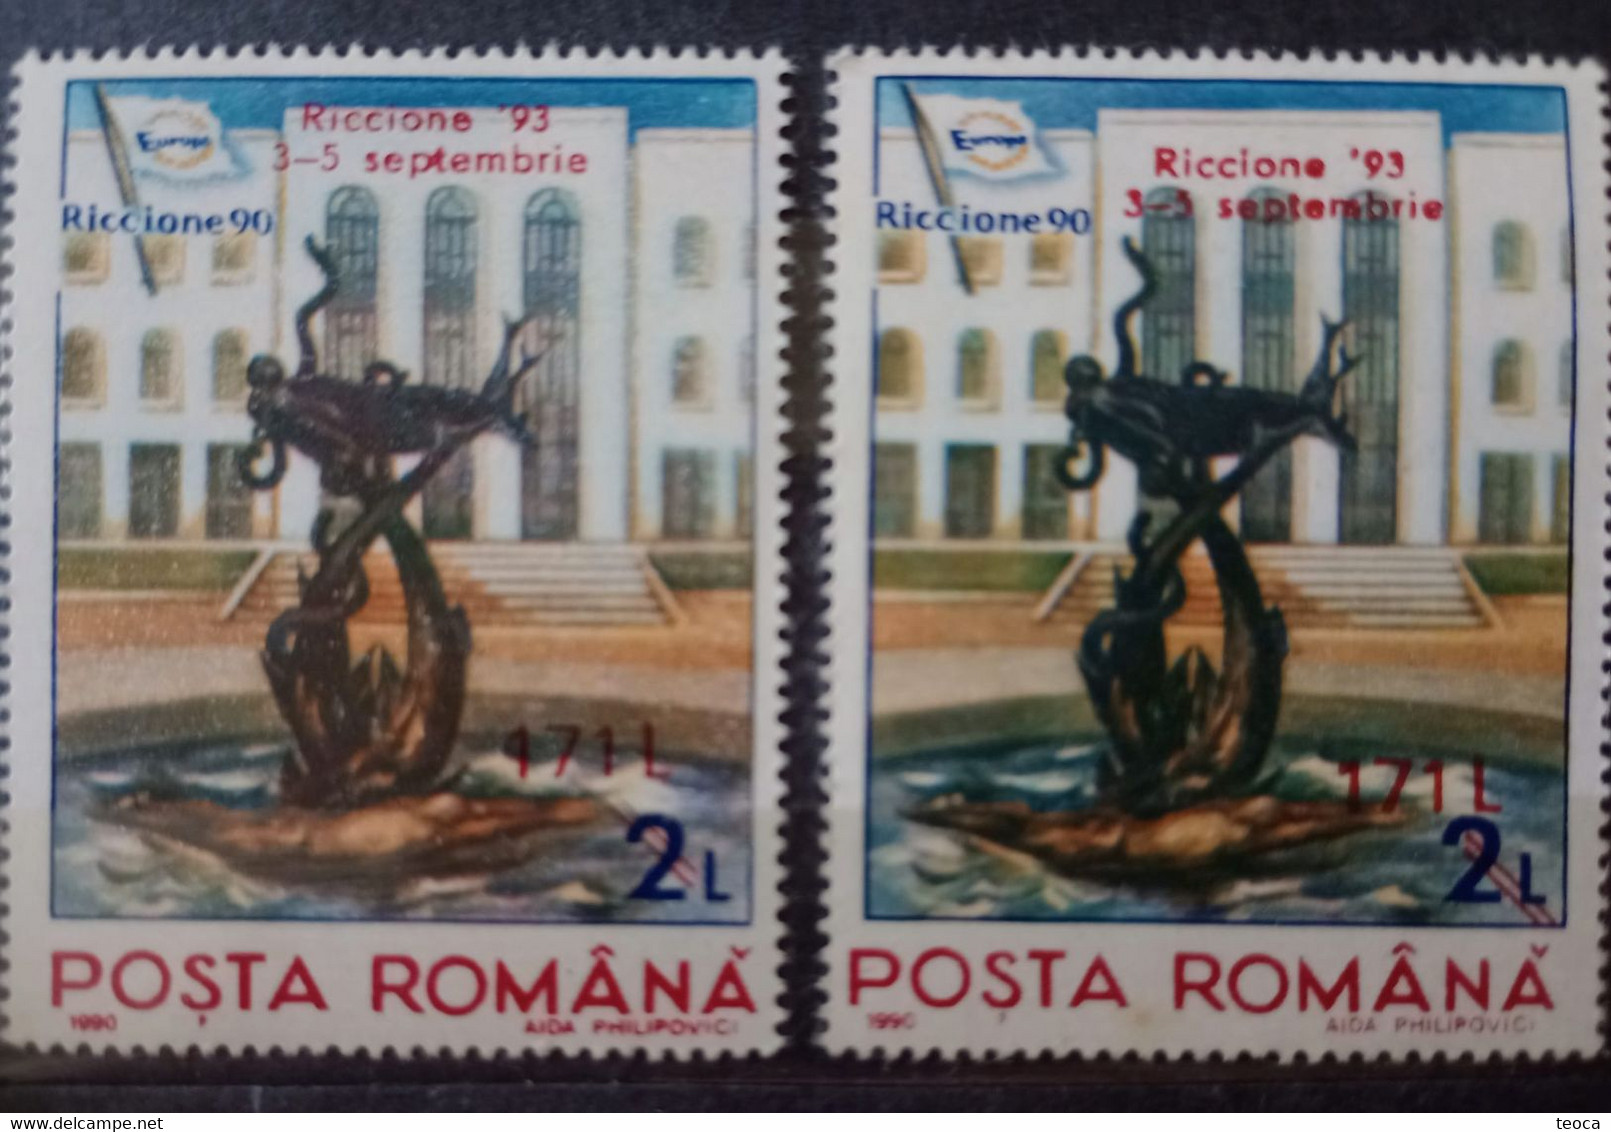 Stamps Errors Romania 1993, # Mi 4922 Printed With Misplaced Surcharge, DIFFERENT COLOR Unused Riccione - Errors, Freaks & Oddities (EFO)